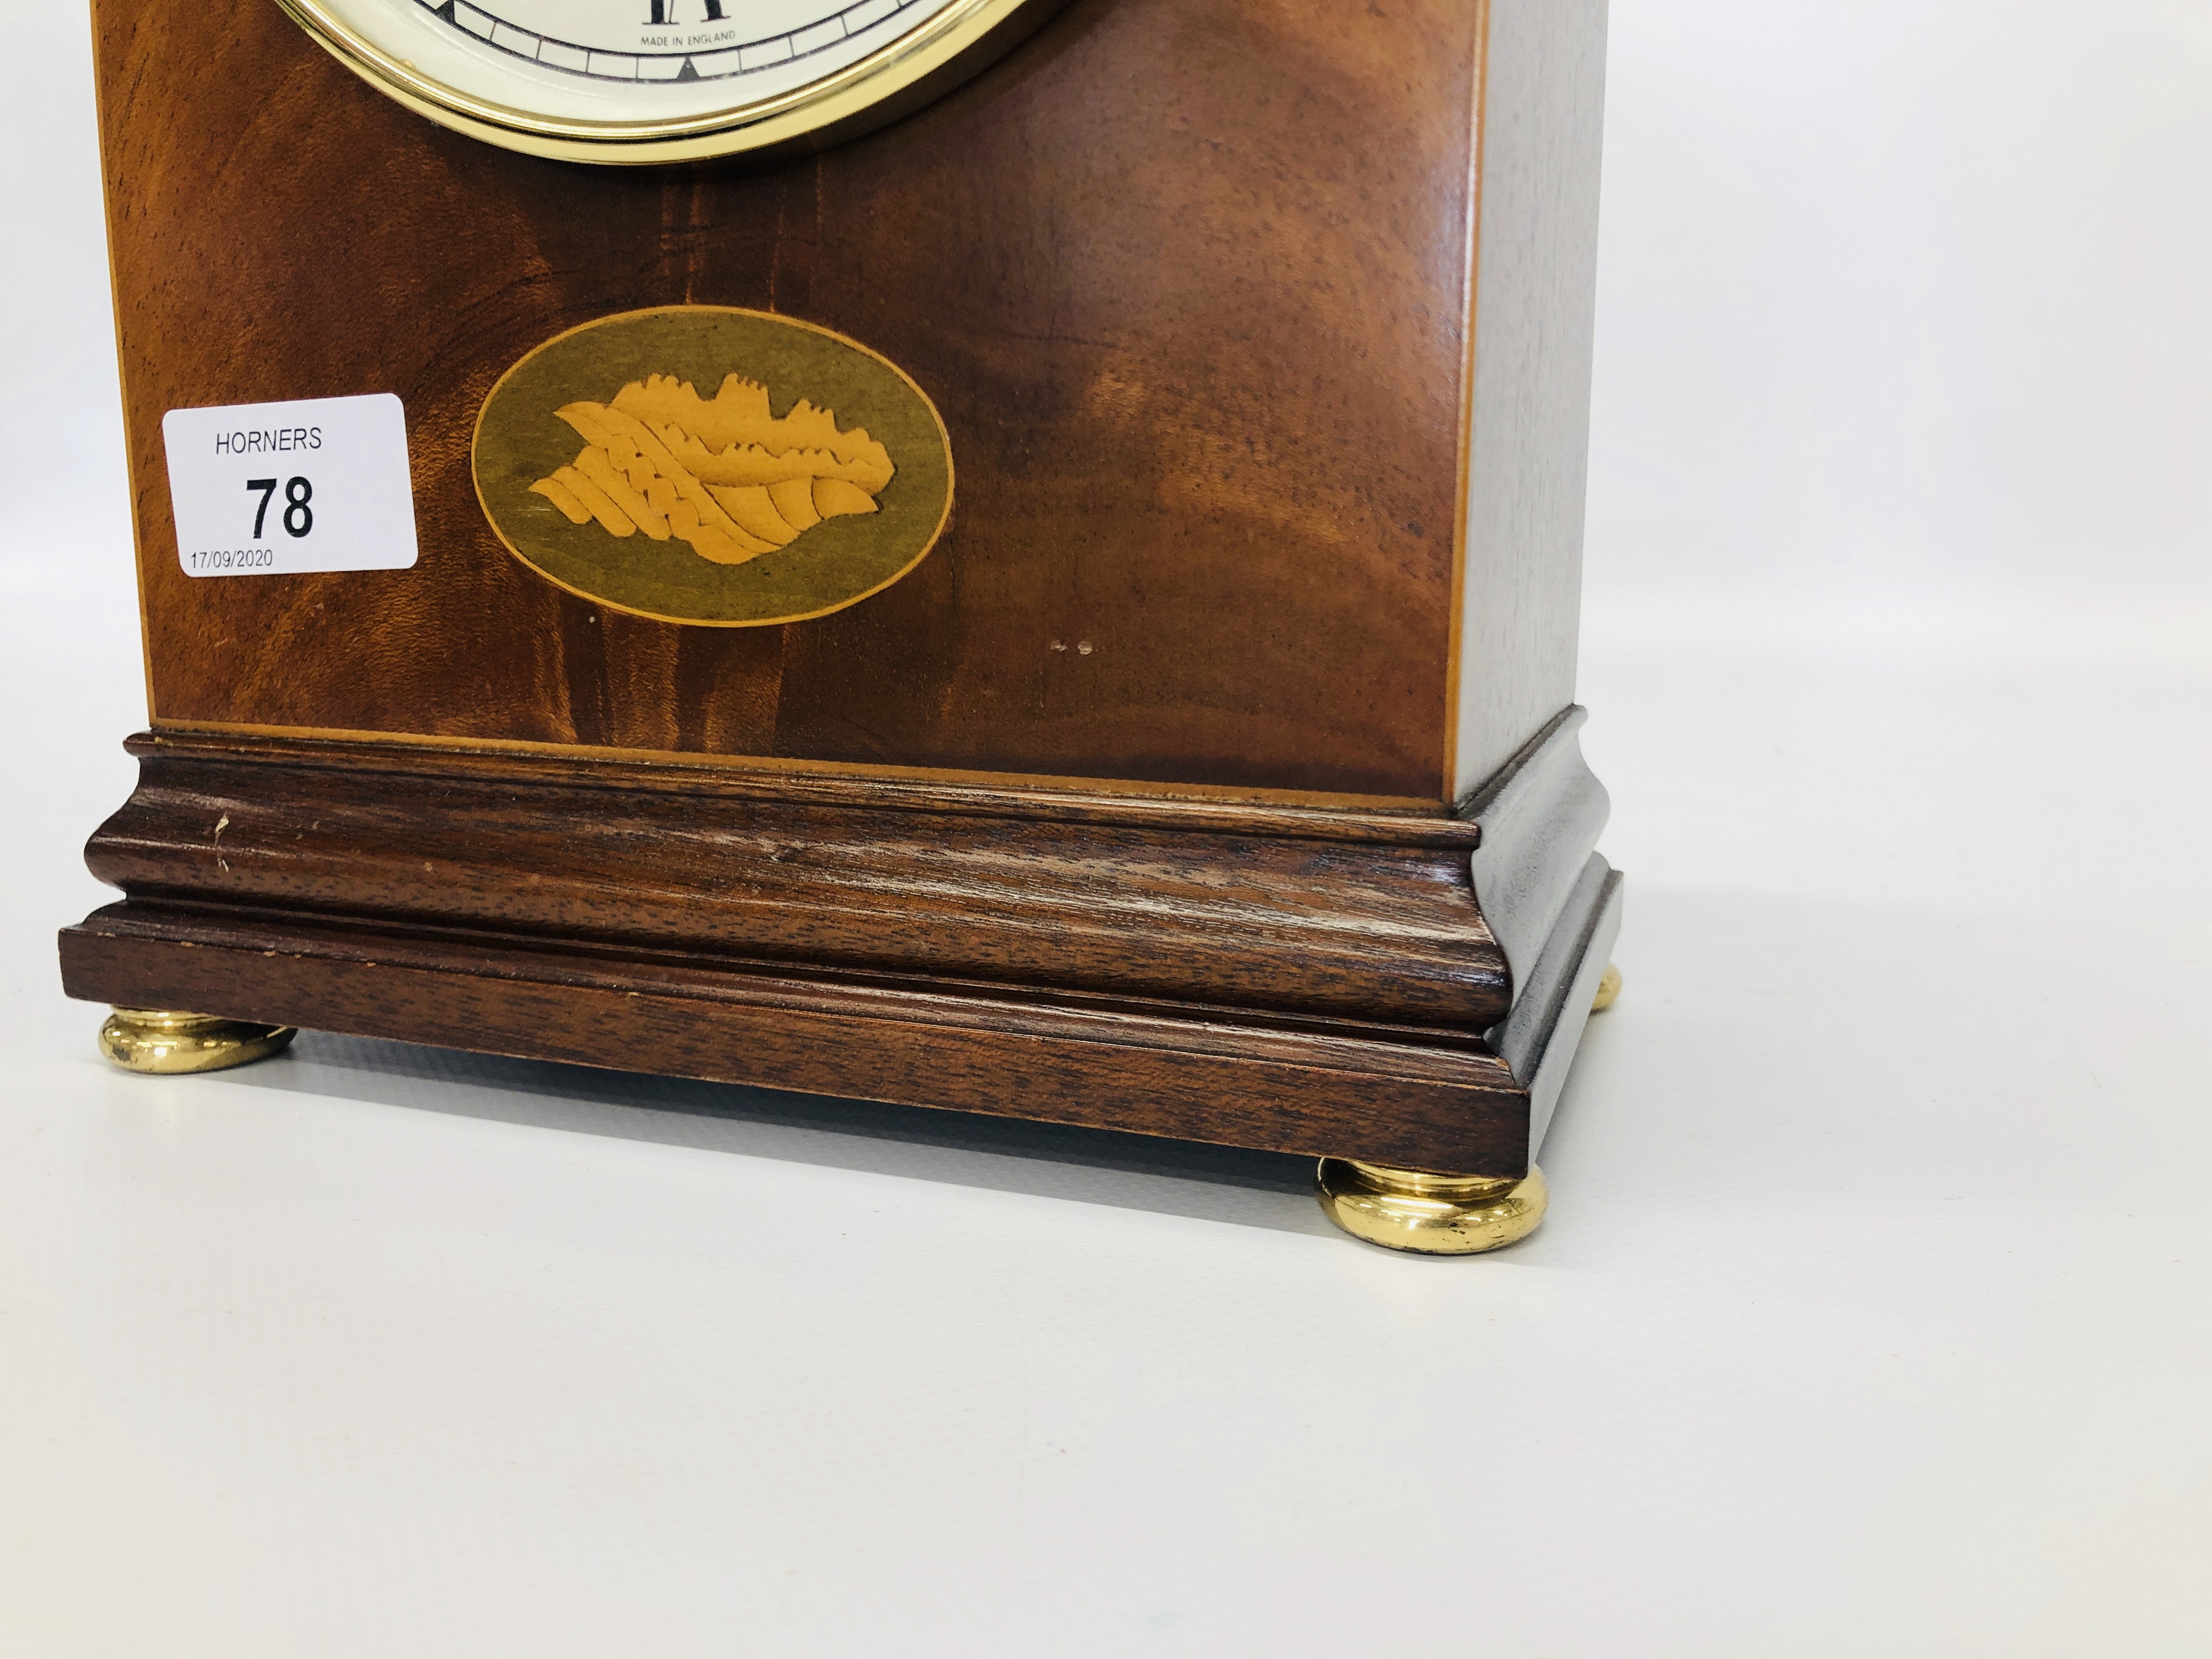 A GOOD QUALITY REPRODUCTION DOME TOP MAHOGANY MANTEL CLOCK WITH WESTMINSTER CHIME THE DIAL MARKED - Image 3 of 7